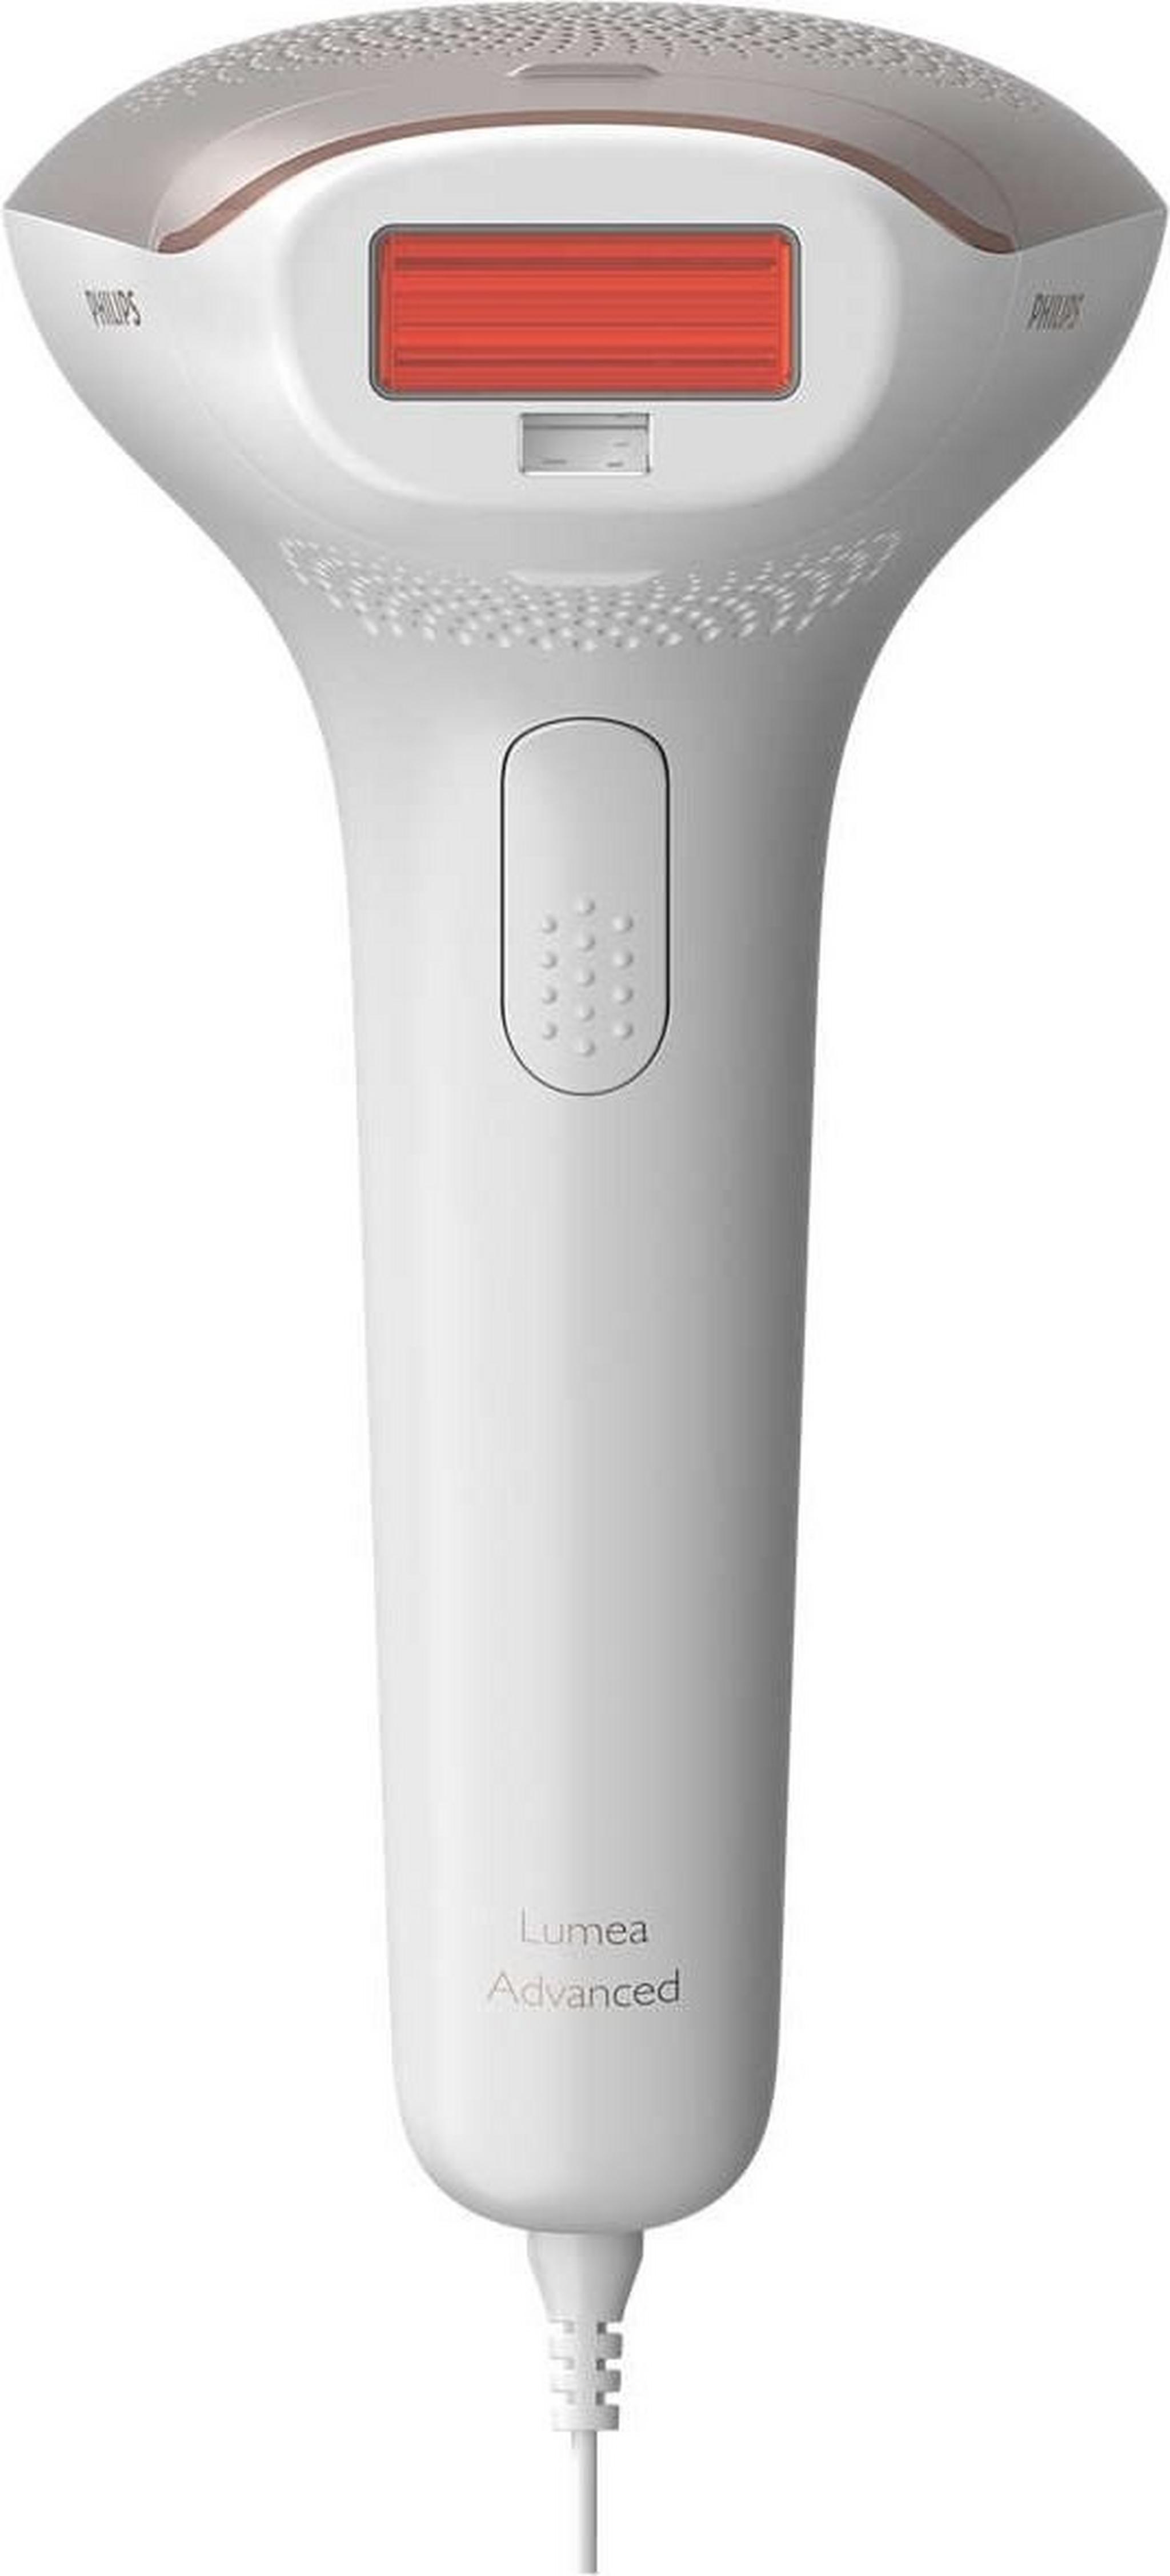 Philips Lumea Series 7000 Hair-Free Smooth Skin with Satin Compact Pen Trimmer, Corded, 3 Attachement, BRI923/60 - White